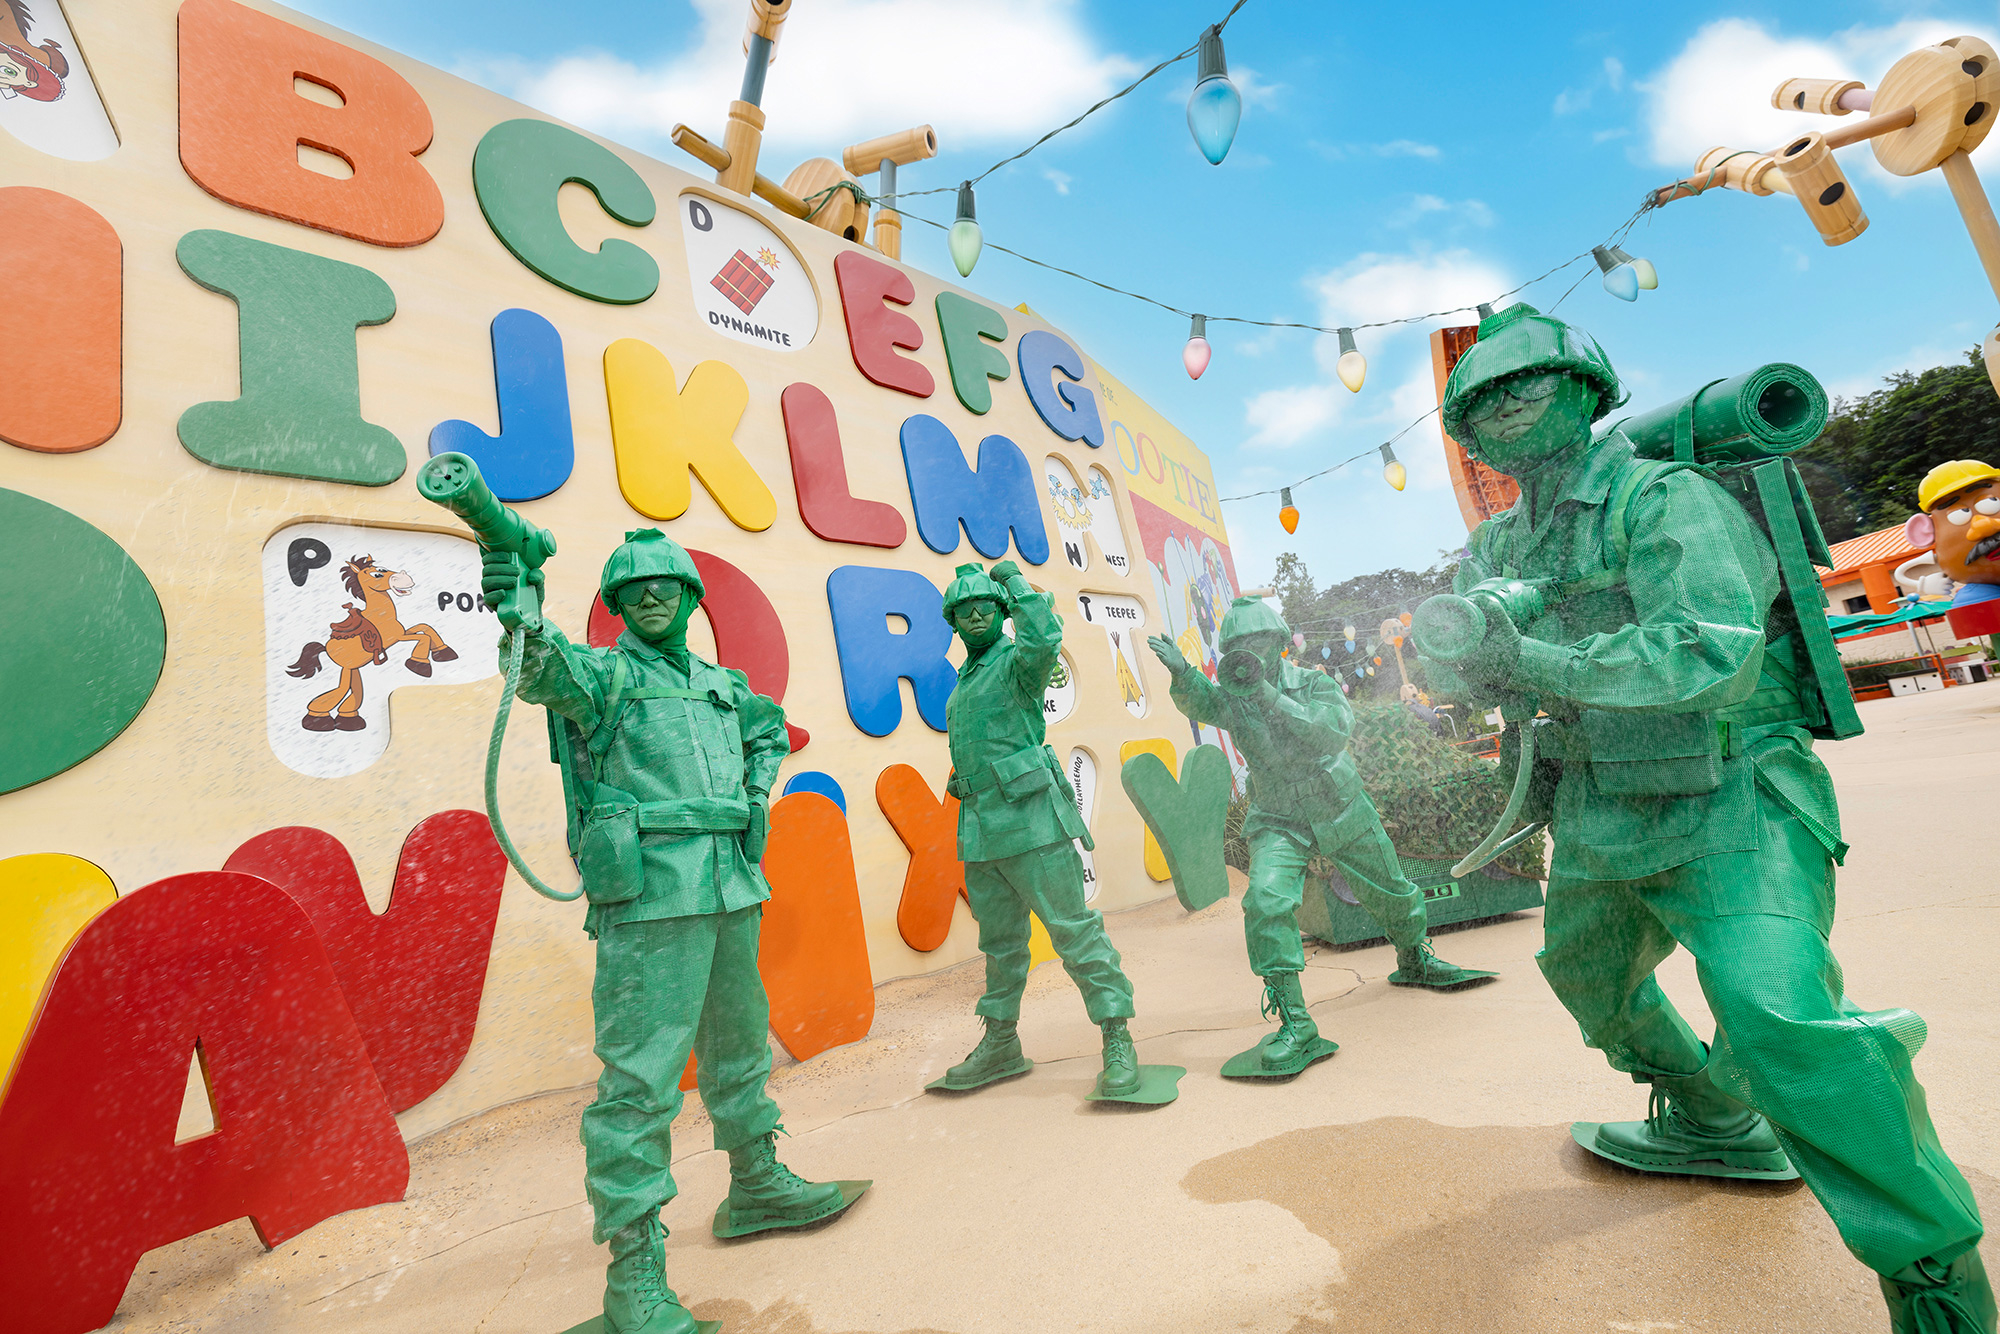 Three performers in green army men costumes from &#x27;Toy Story&#x27; pose at a themed park event